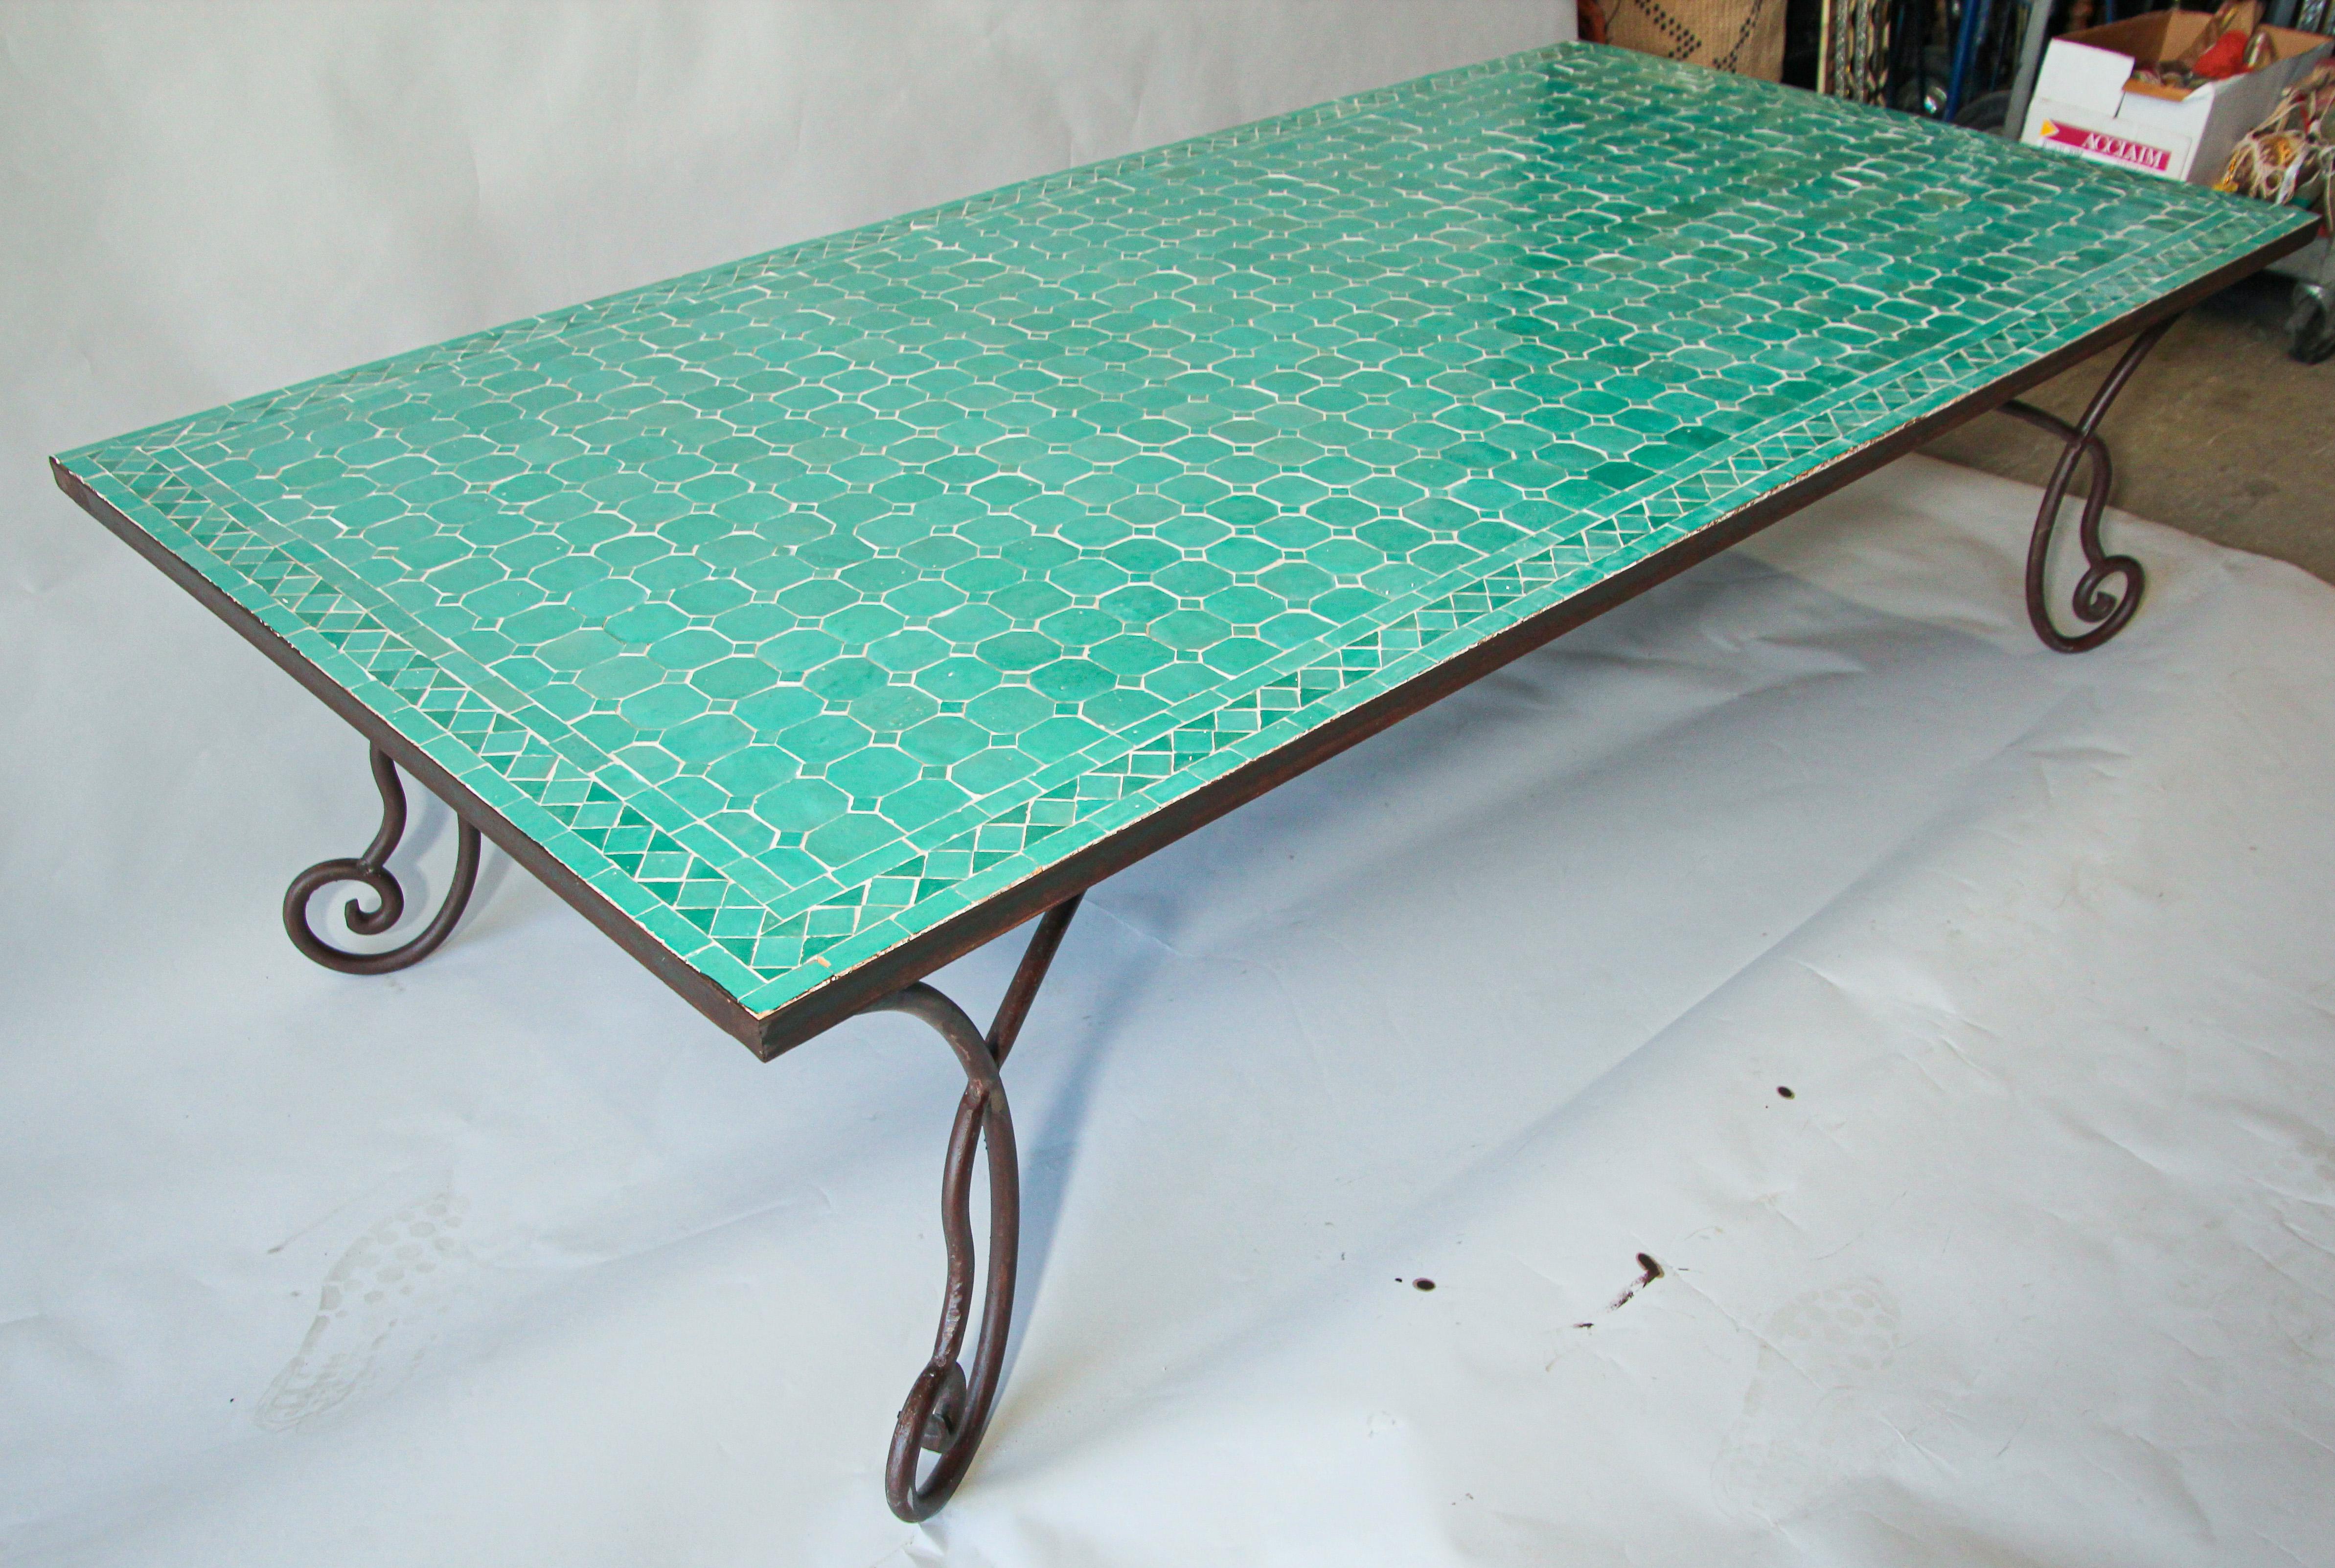 Handcrafted vintage mosaic tile tabletop, handmade using reclaimed Moroccan tiles of different shades of teal colors.
Moroccan glazed turquoise teal blue tiles.
Great Moroccan outdoor mosaic tile coffee table, delicately handcrafted in fez with